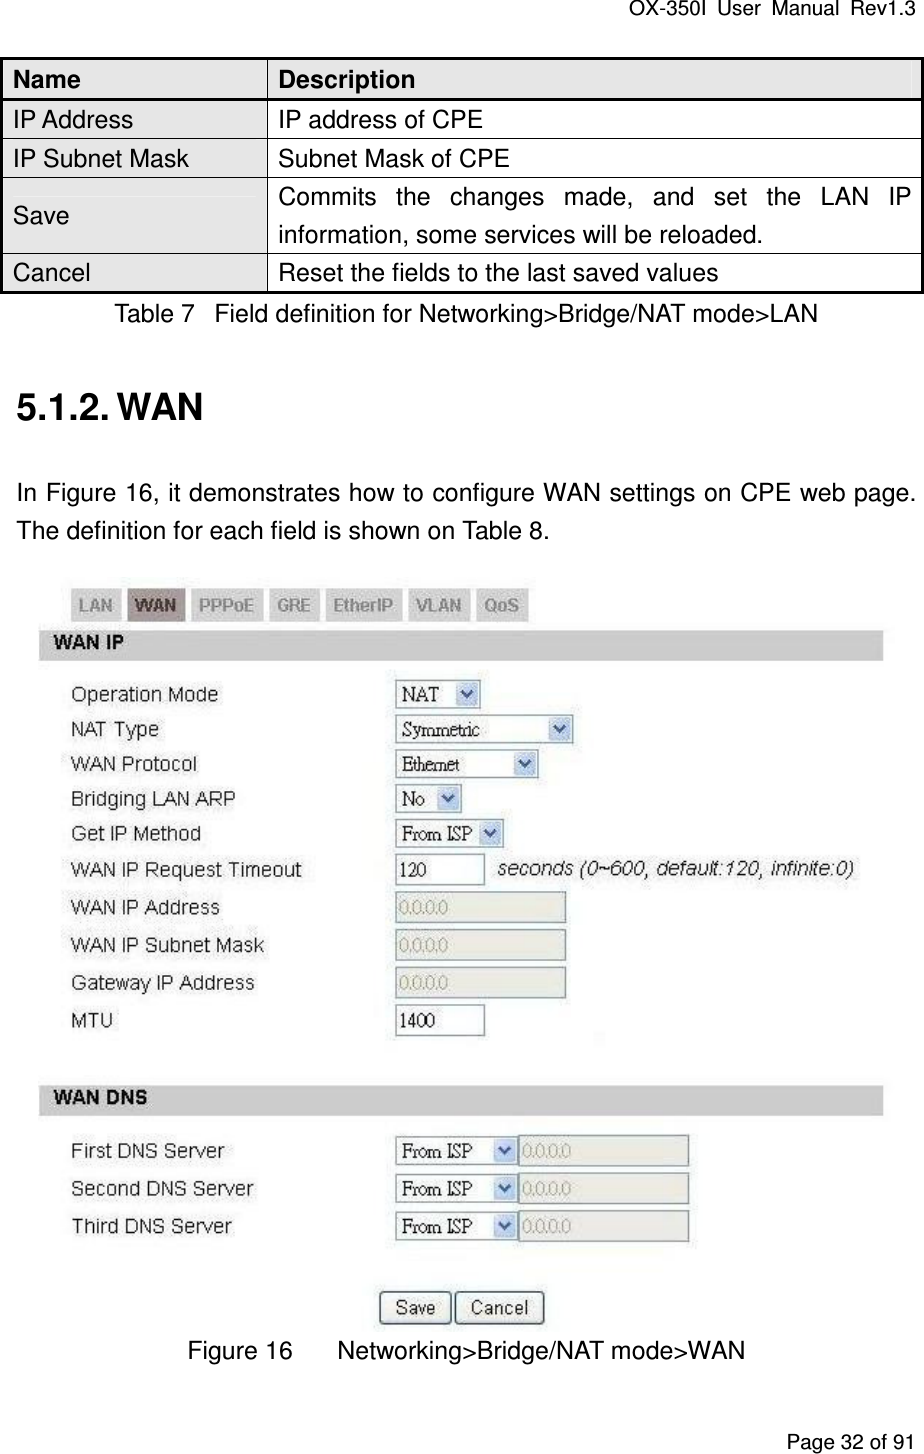 OX-350I  User  Manual  Rev1.3 Page 32 of 91 Name  Description IP Address  IP address of CPE IP Subnet Mask  Subnet Mask of CPE Save  Commits  the  changes  made,  and  set  the  LAN  IP information, some services will be reloaded. Cancel  Reset the fields to the last saved values Table 7  Field definition for Networking&gt;Bridge/NAT mode&gt;LAN 5.1.2. WAN In Figure 16, it demonstrates how to configure WAN settings on CPE web page. The definition for each field is shown on Table 8.  Figure 16  Networking&gt;Bridge/NAT mode&gt;WAN 